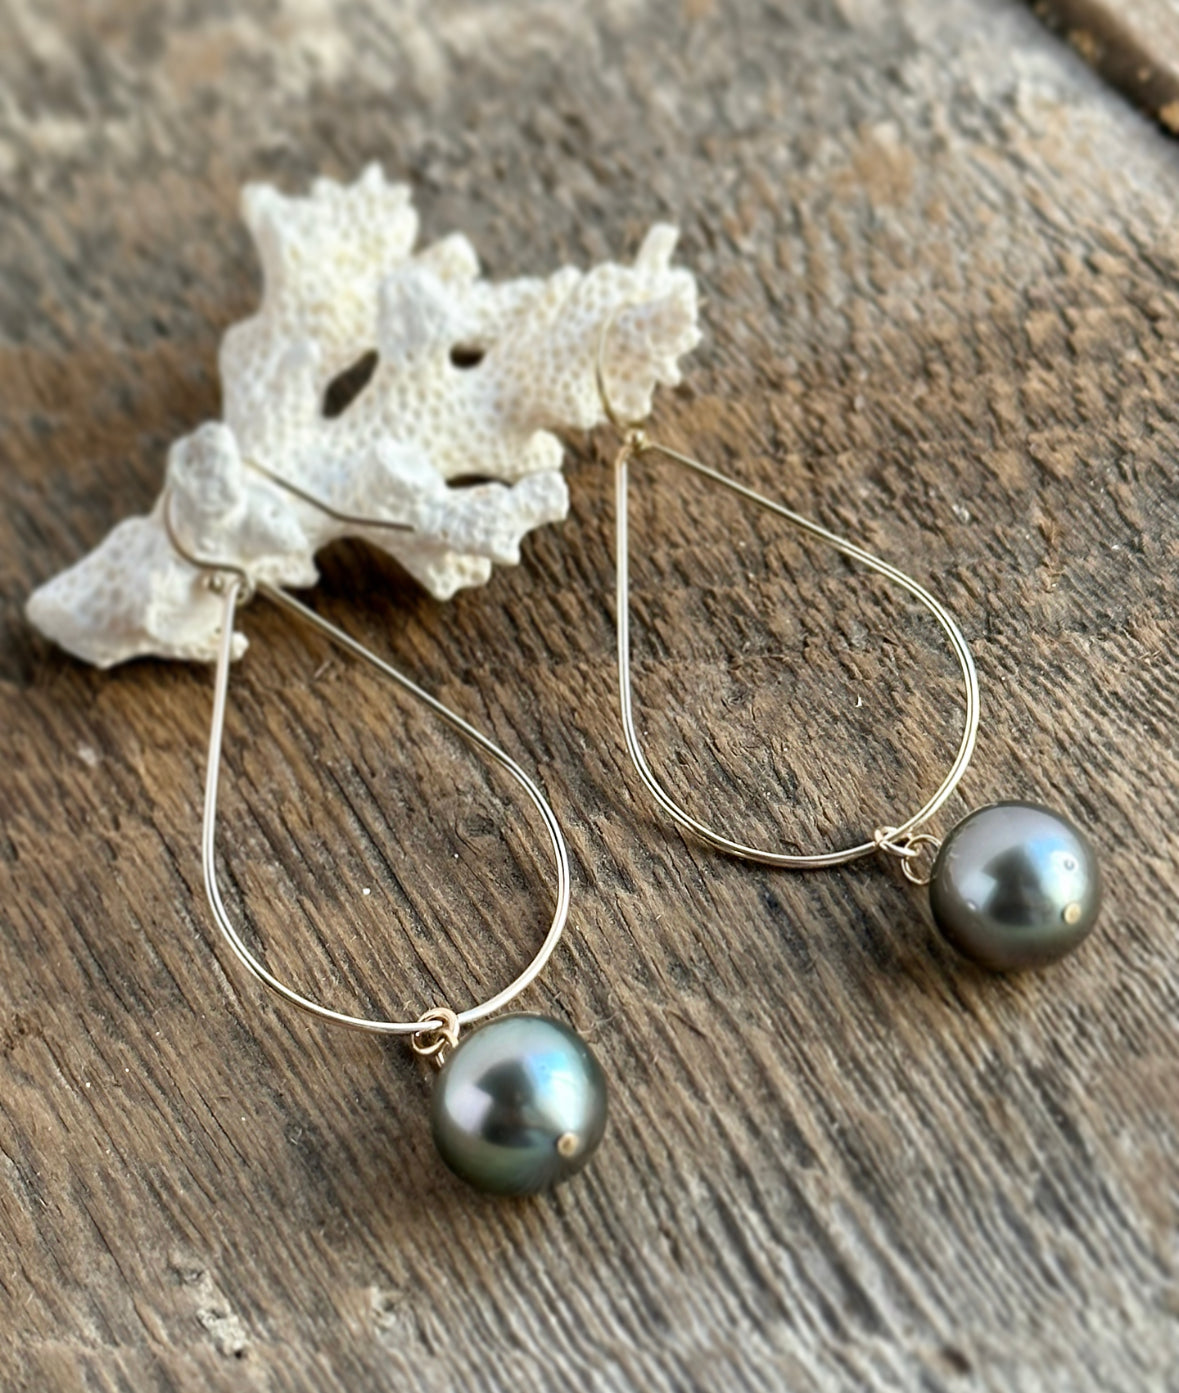 A pair of teardrop hoops in gold with small Tahitian pearls dangling. the earrings are hanging on a piece of coral on a wooden background